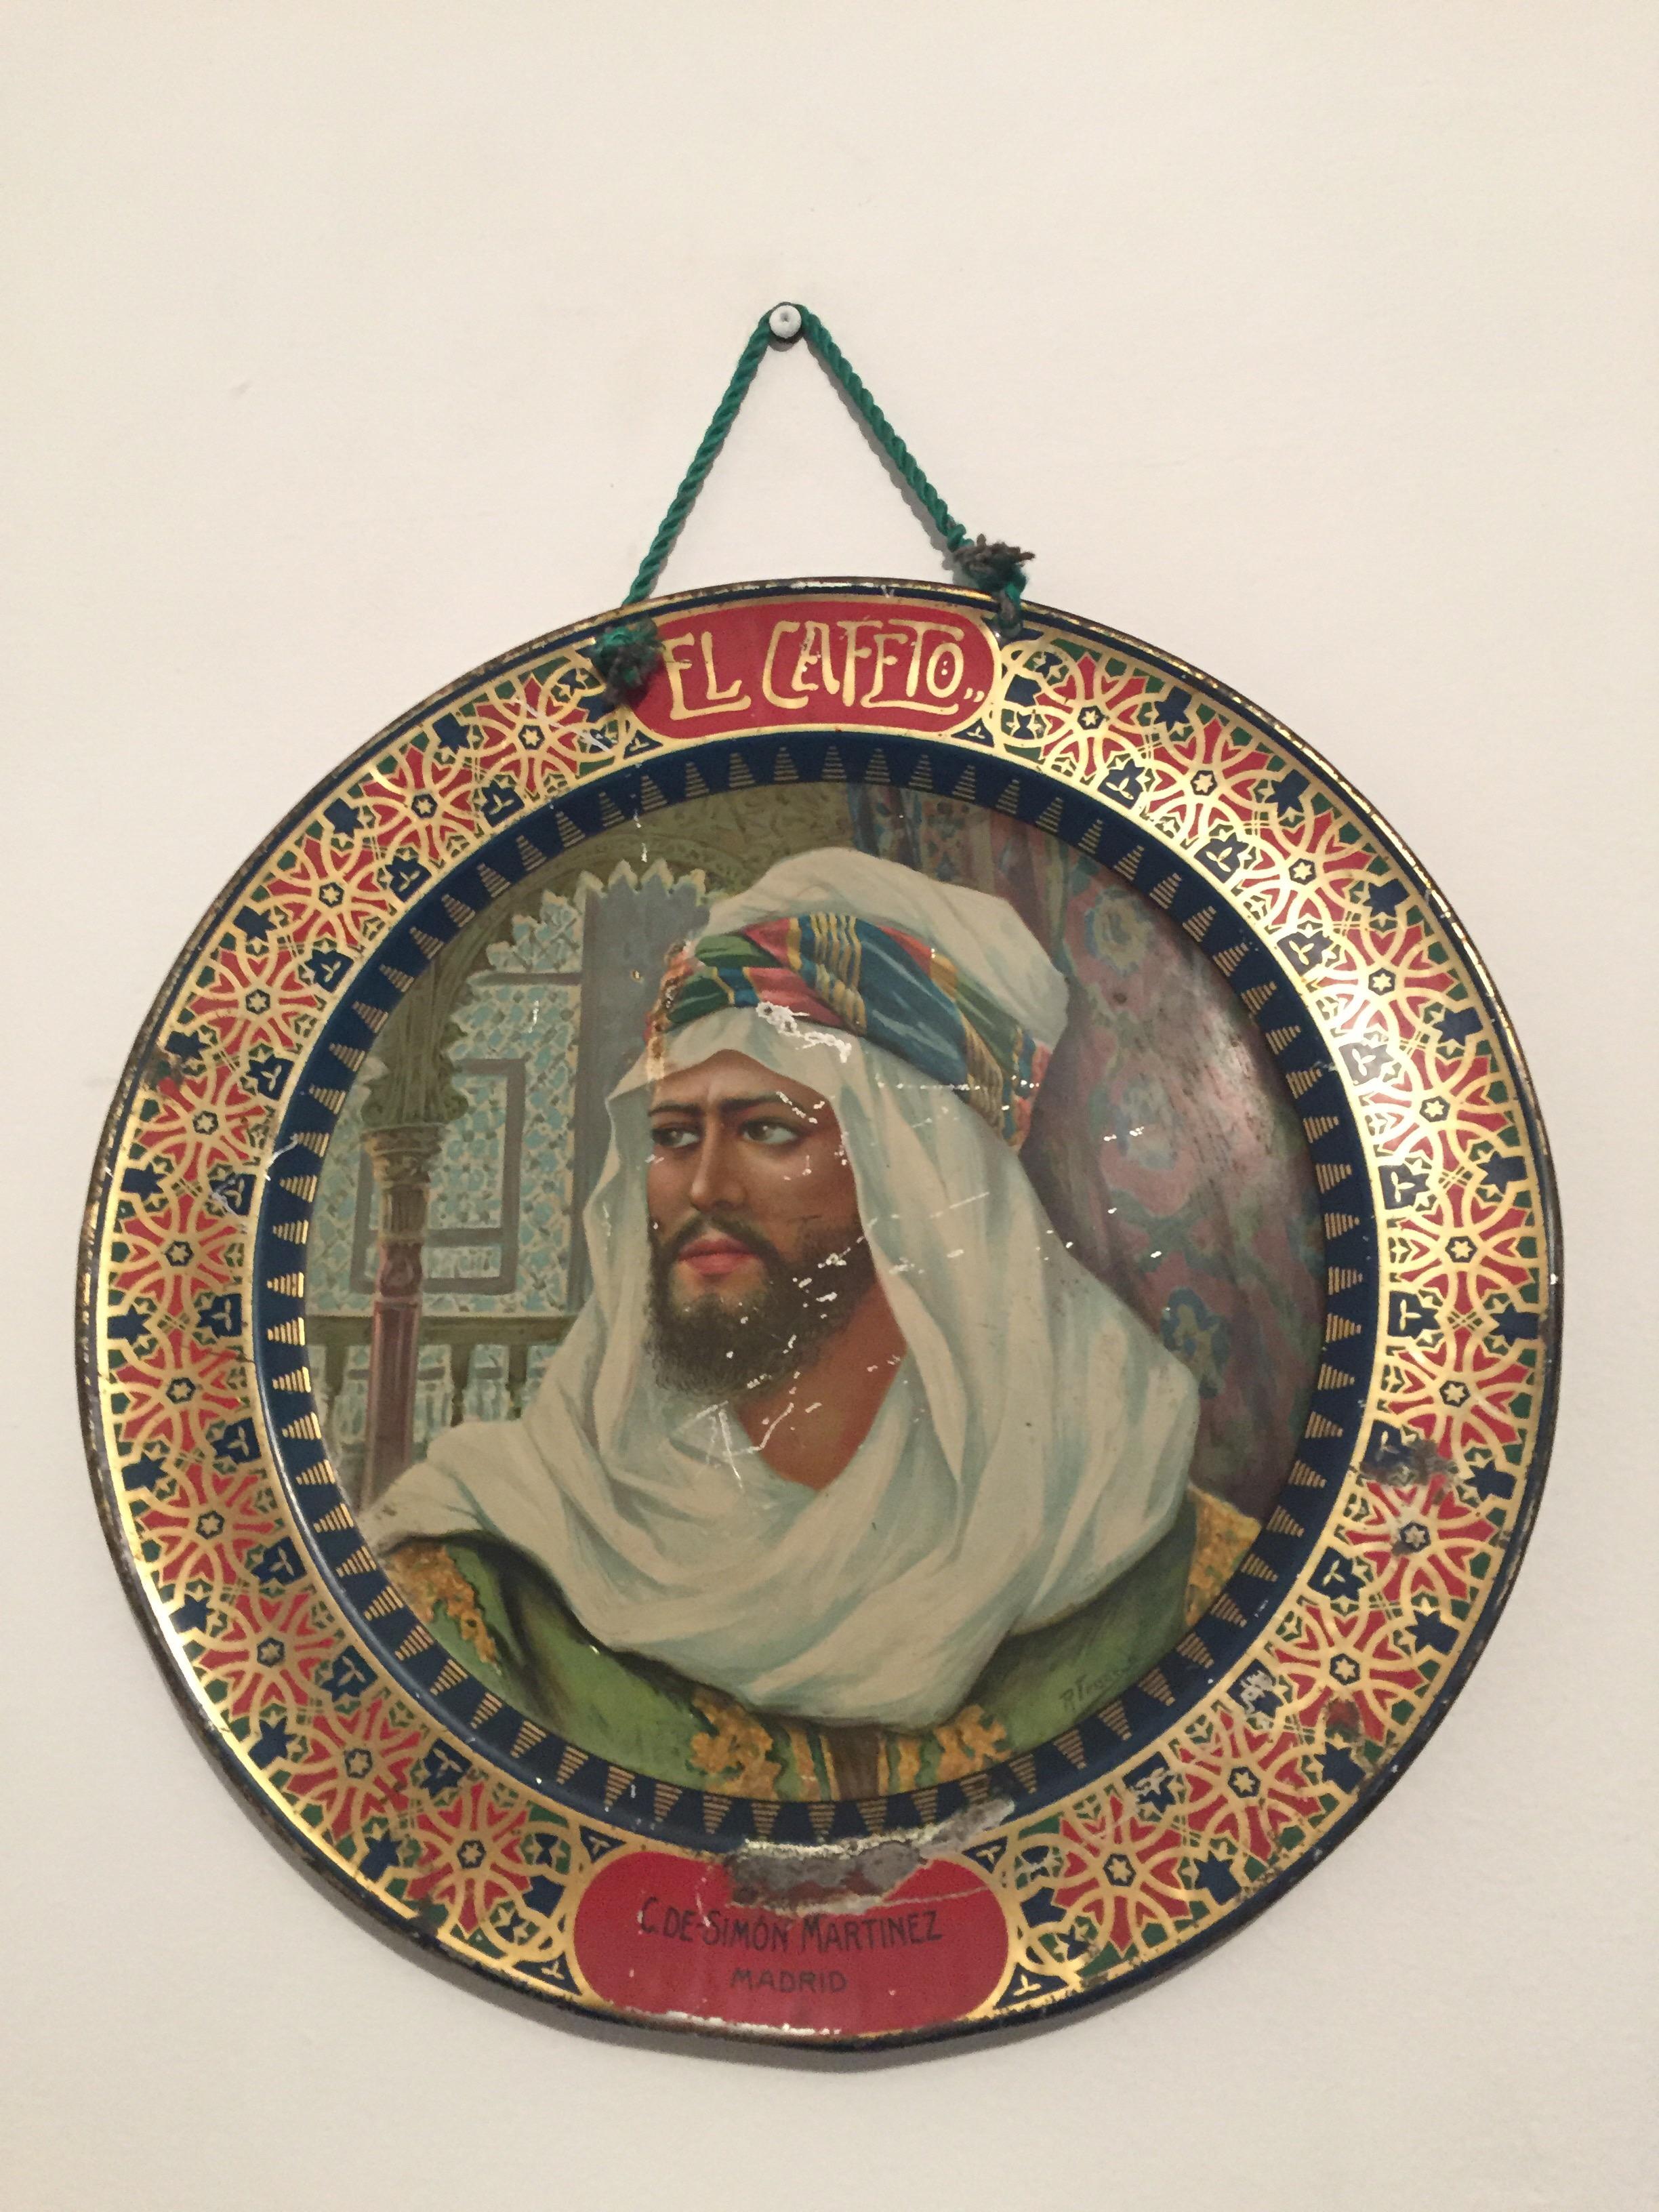 El Cafeto Metal Hanging Advertising Plate with a Moorish Prince 10